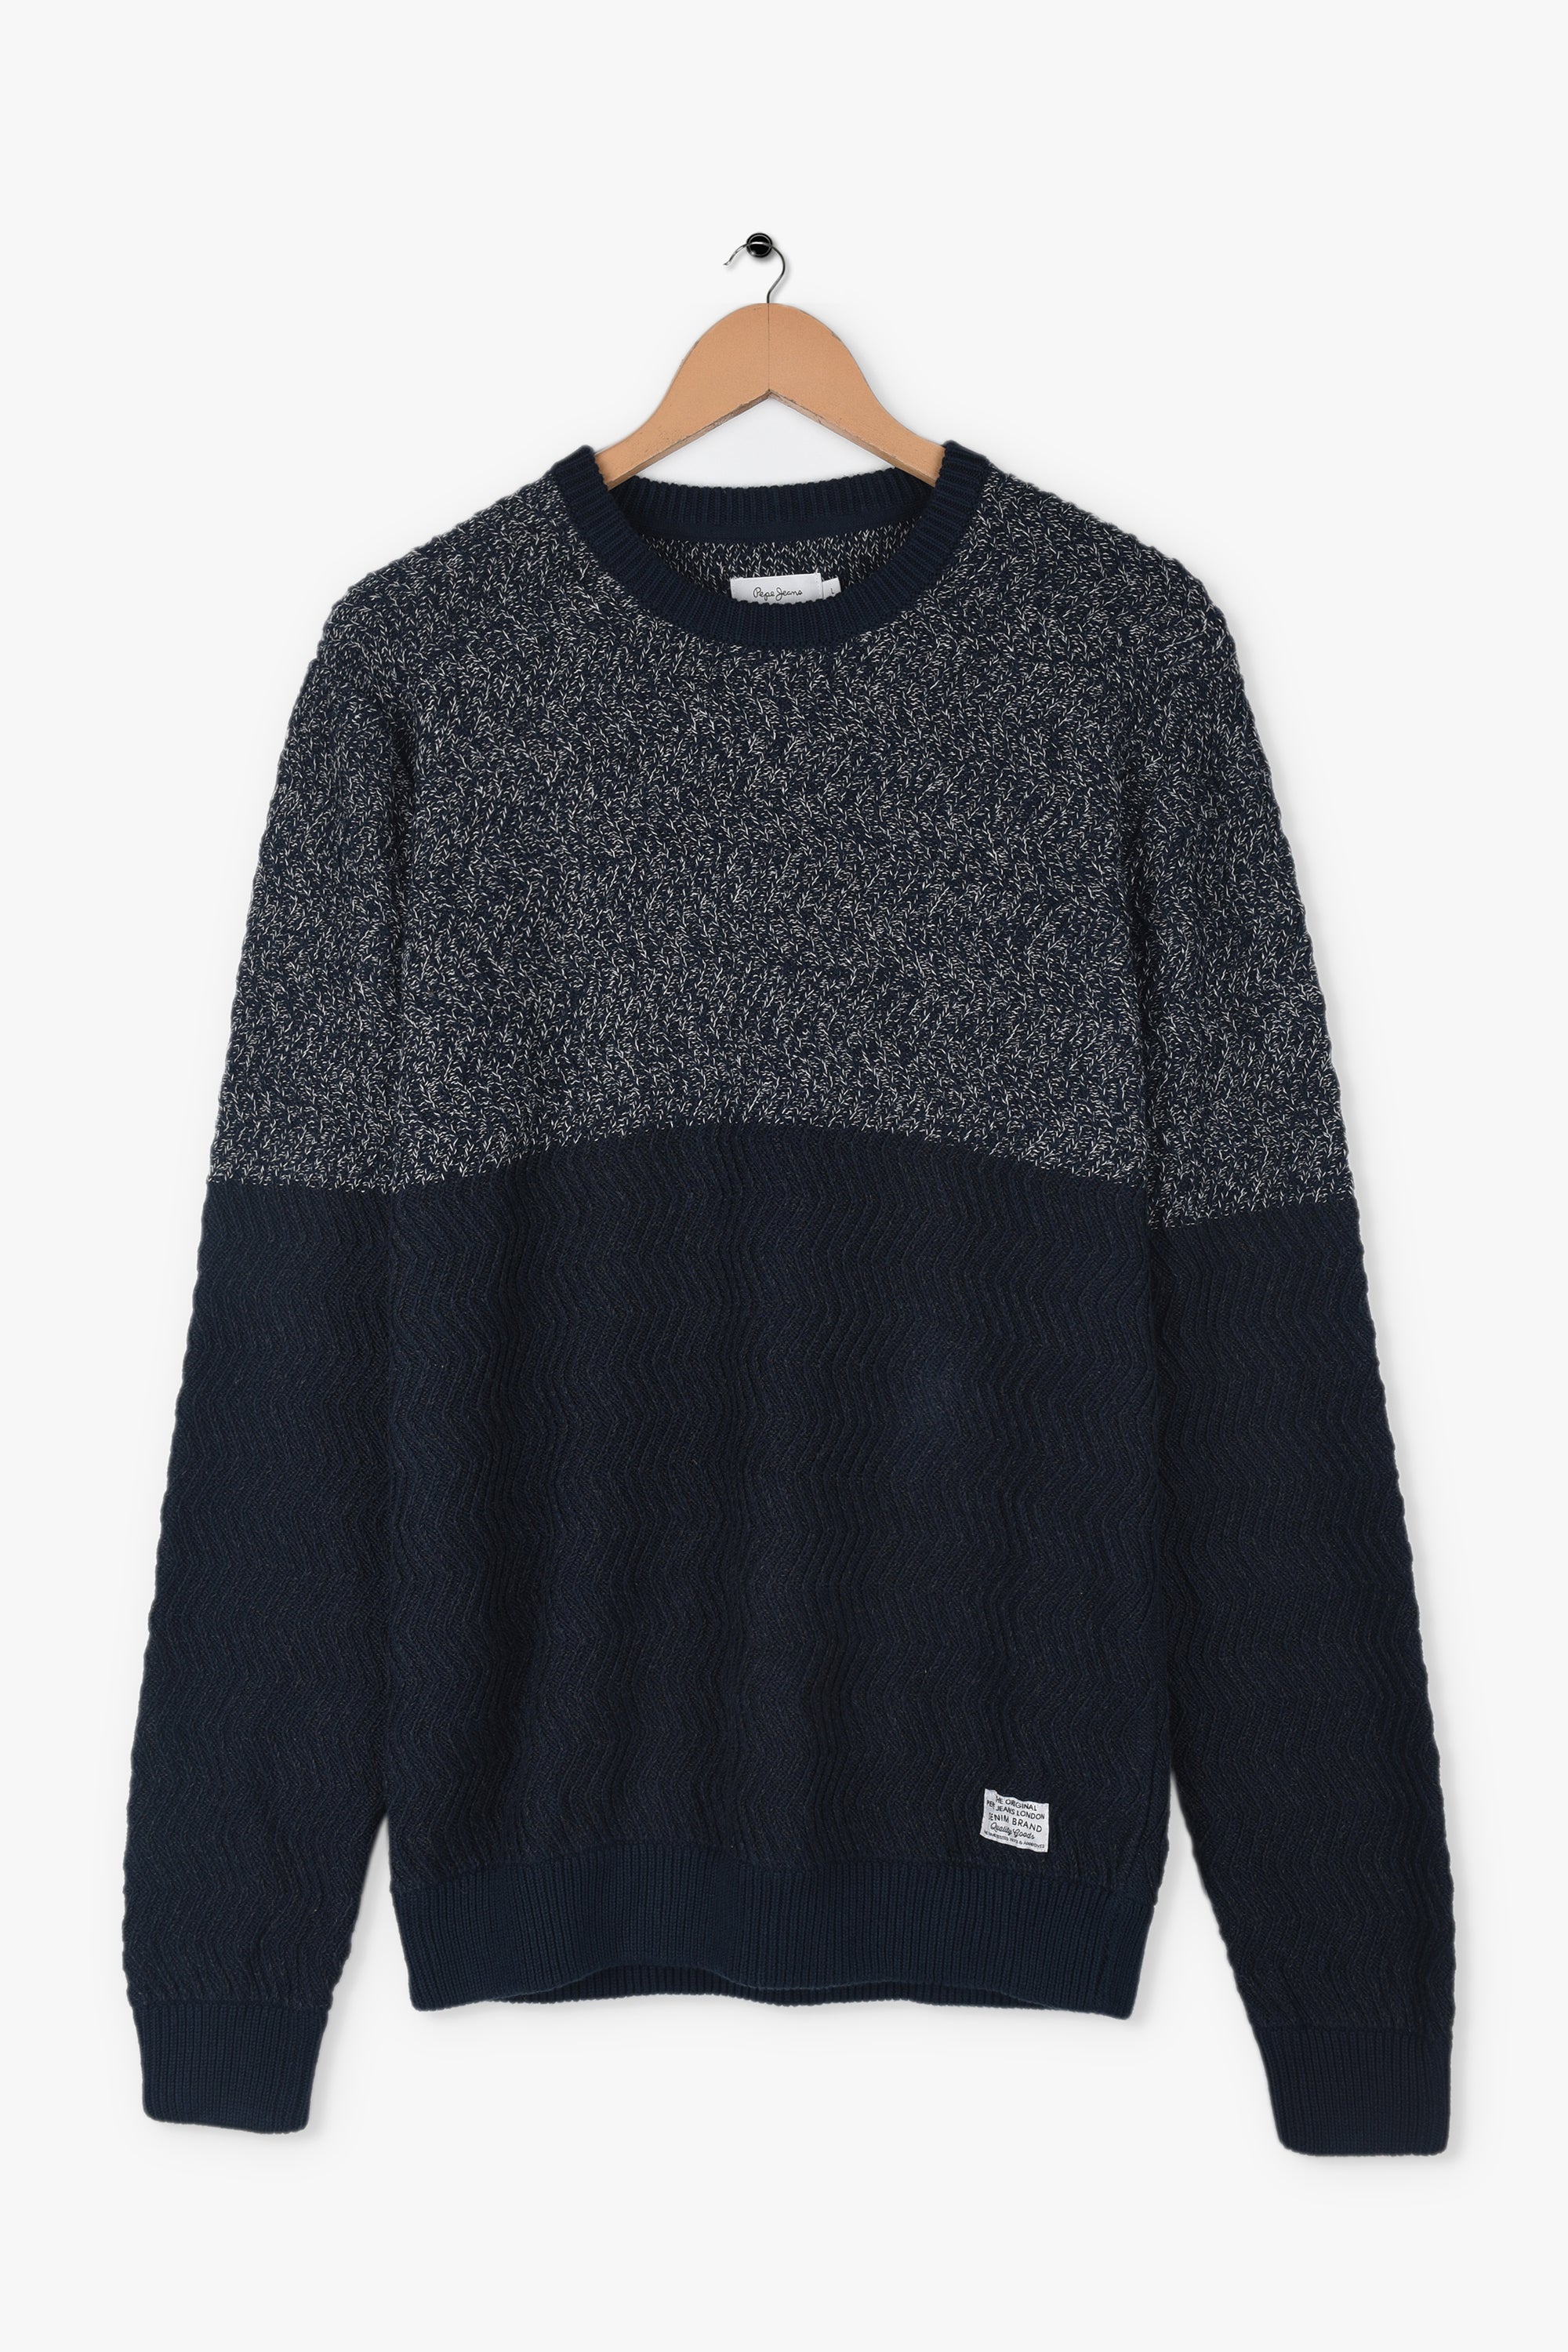 PEPE JEANS COMFY SWEATER